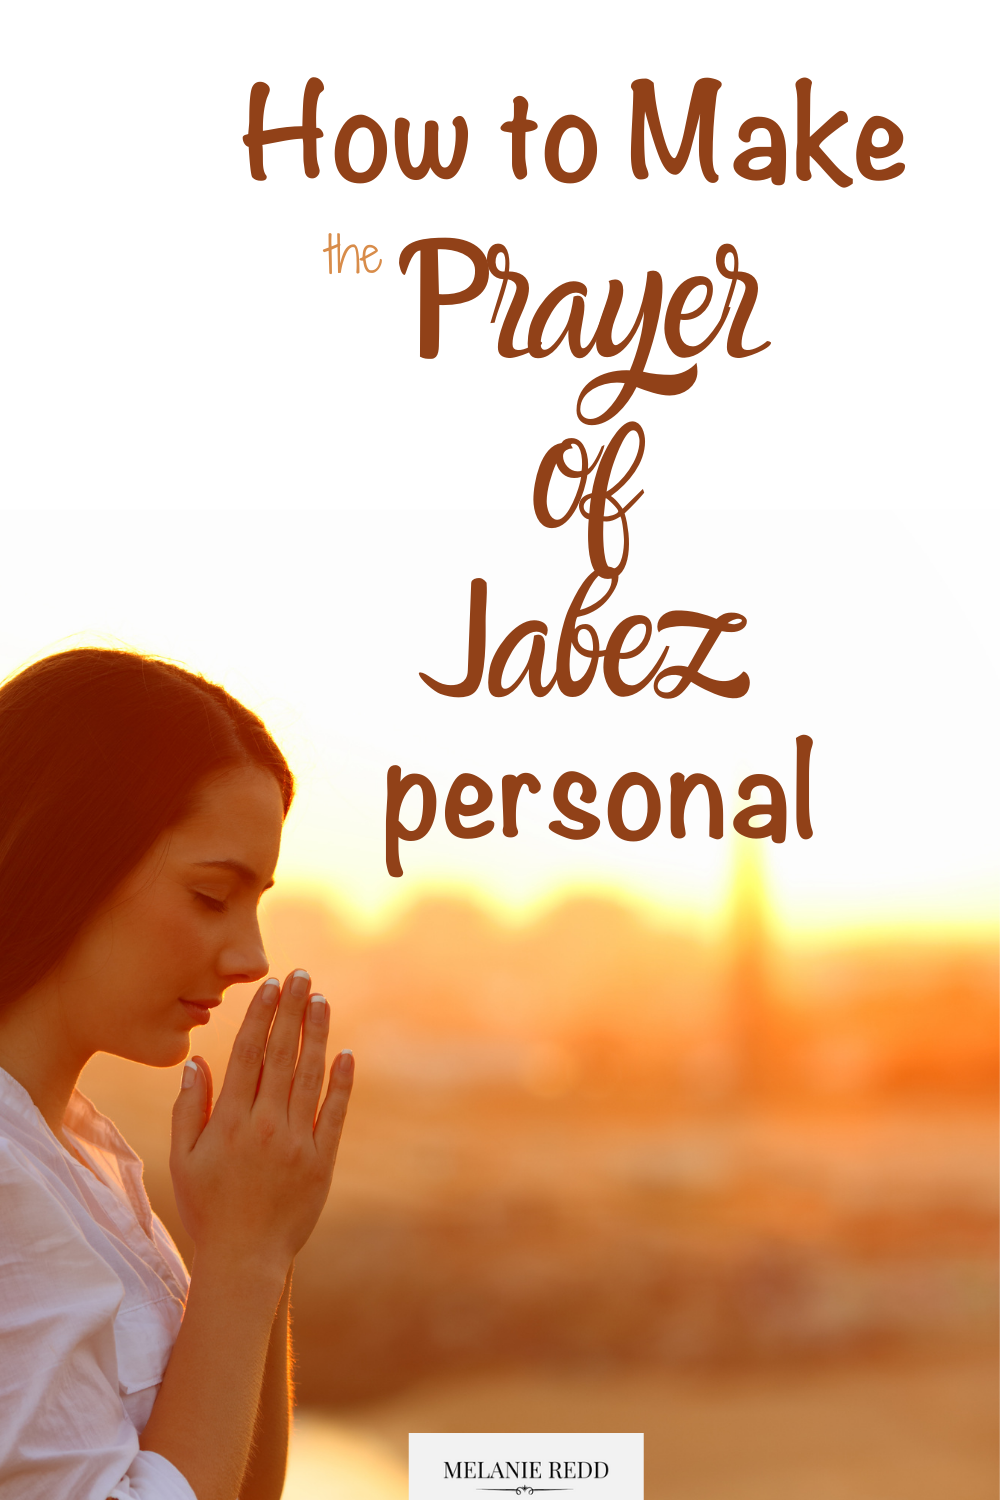 There are some wonderful models of prayer in the Bible. We can take them and pray them. Here is how to make the Prayer of Jabez personal.